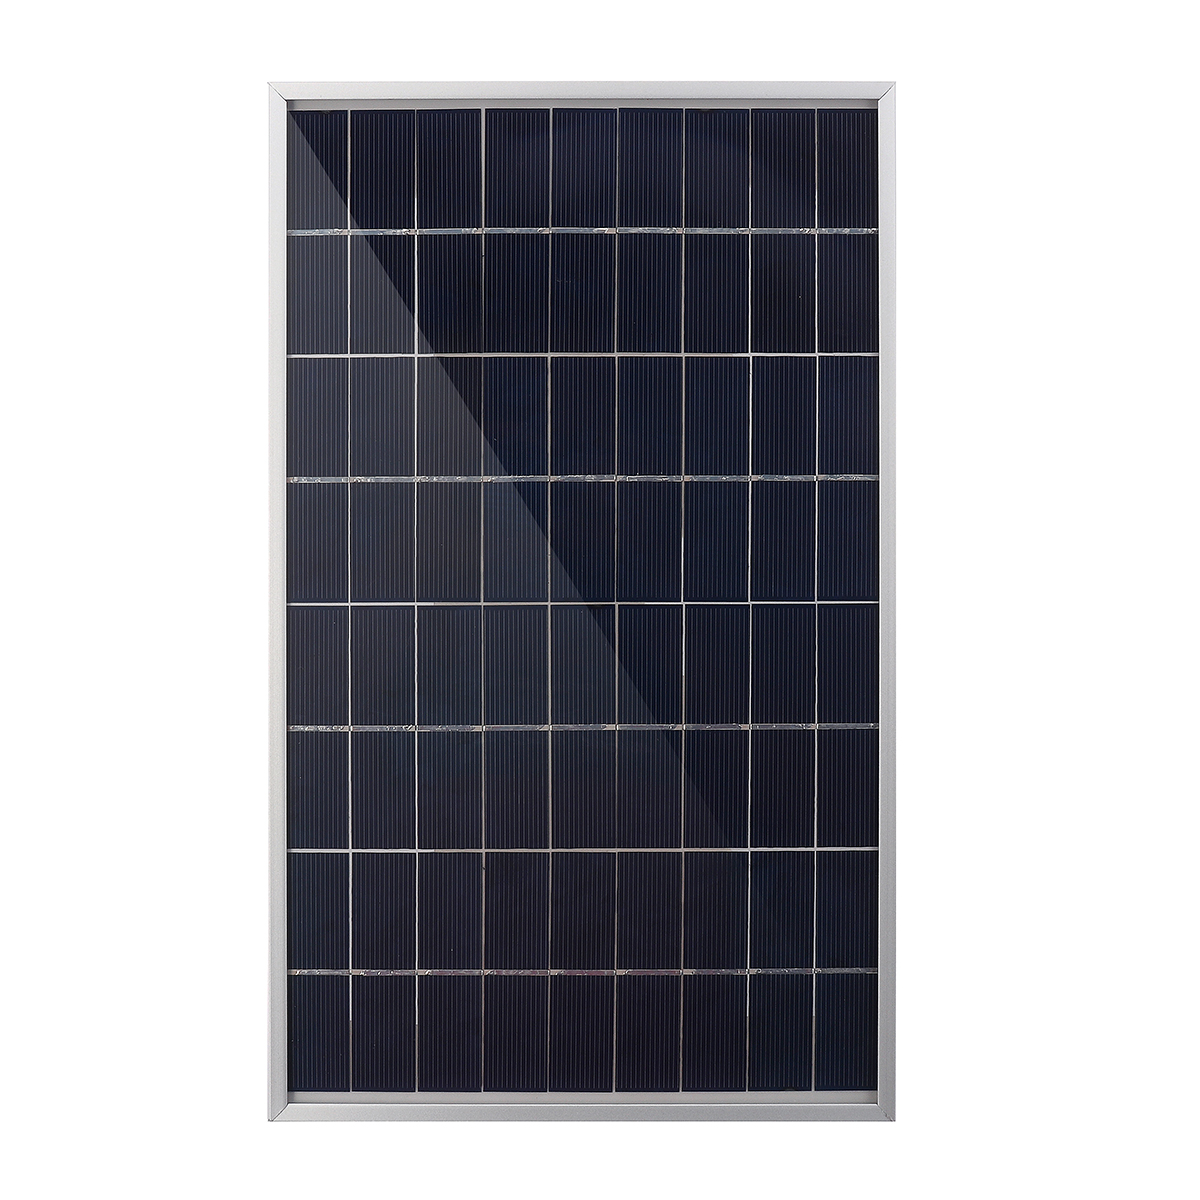 10W-12V-Portable-Solar-Panel-WIth-Battery-Clip--40A-Solar-Controller-Kit-for-Camping-Traveling-1595603-1